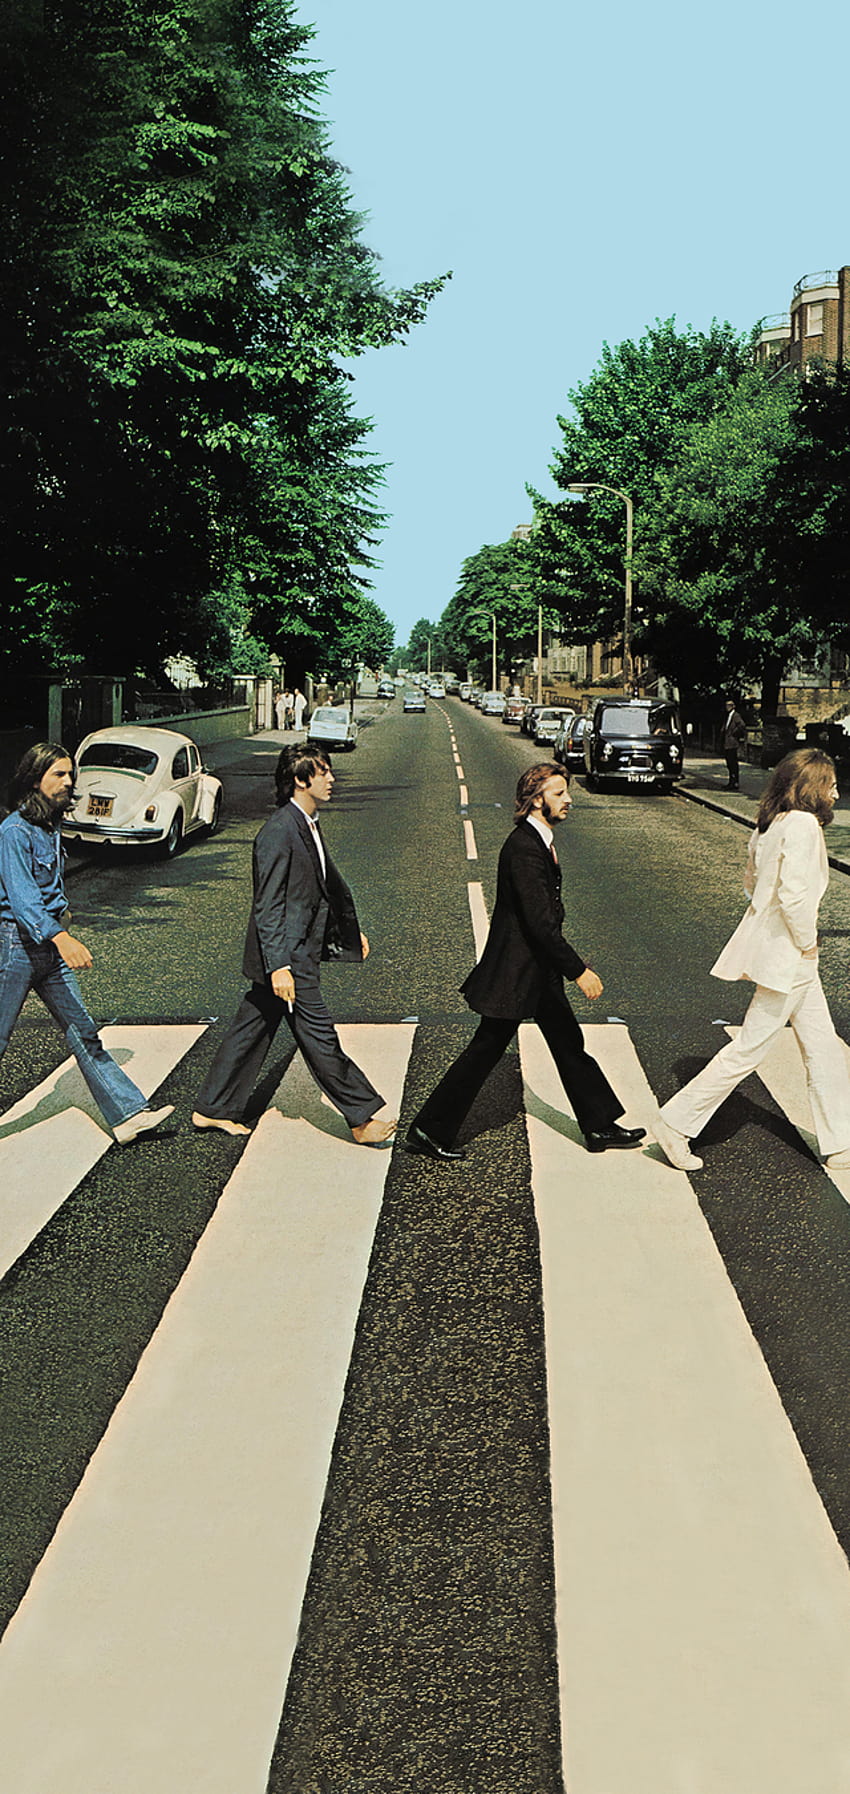 Made some Abbey Road phone ! : r/beatles, iphone beatles HD phone wallpaper